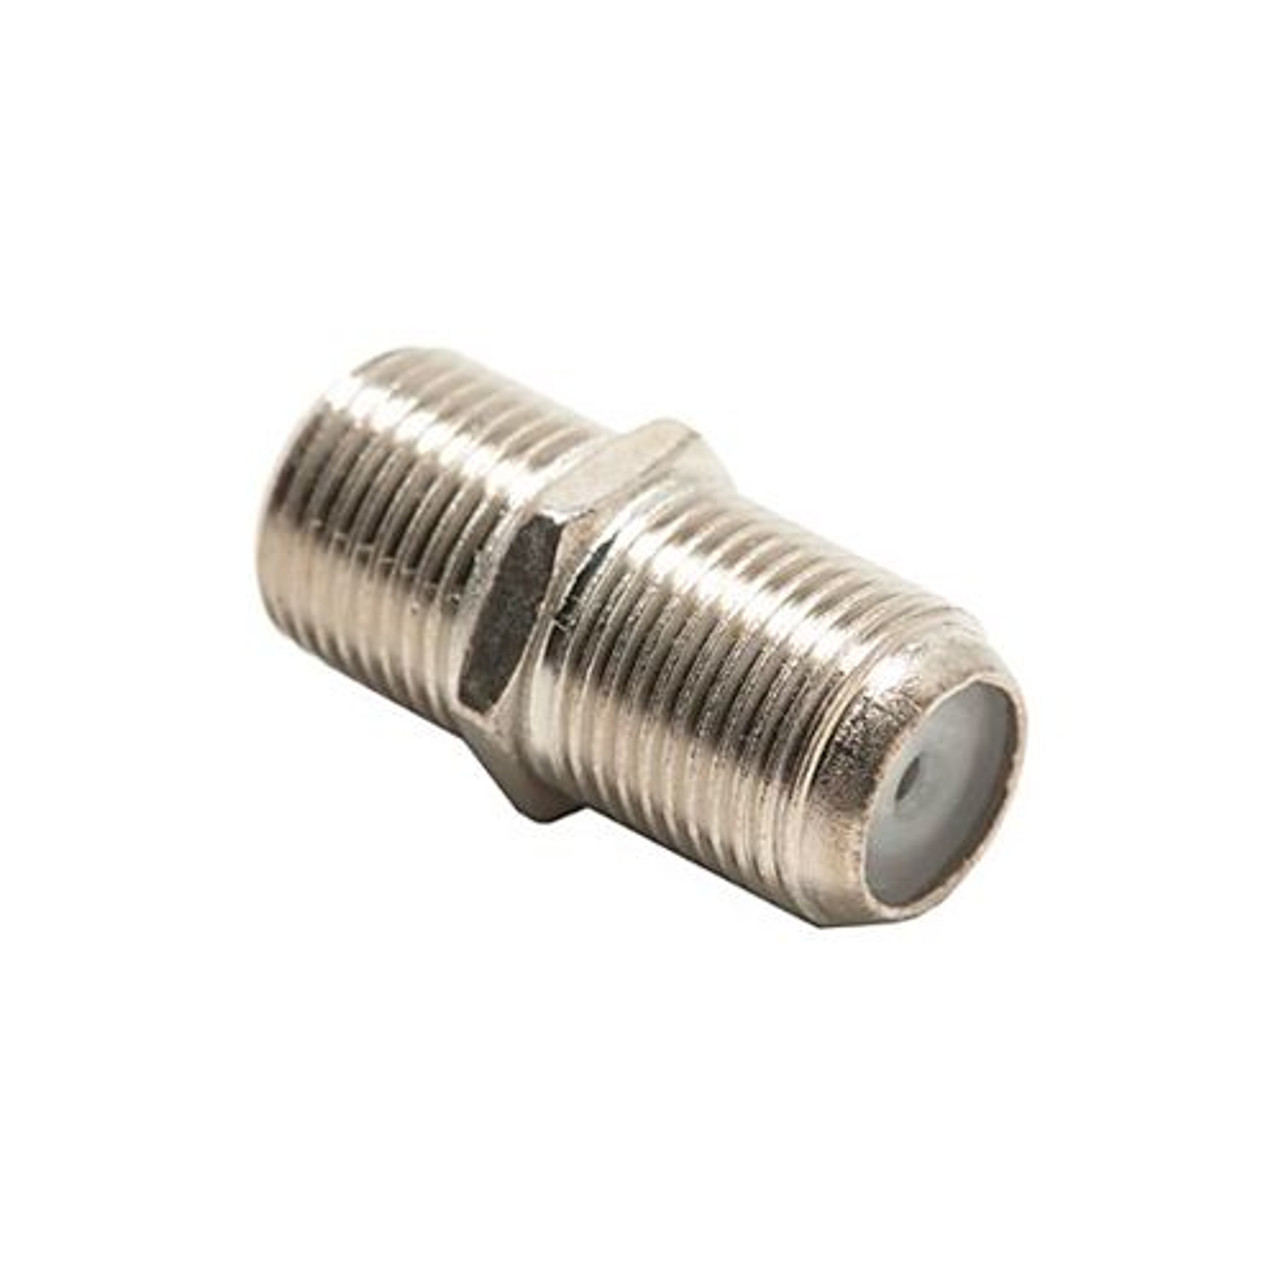 Eagle F Type Coupler Female to Female F-81 Splice Barrel 25 Pack Dual Connector Adapter RG6 RG59 Coaxial Cable 5-900 MHz Jointer Coupling Audio Video 75 Ohm Splice Plug Extension